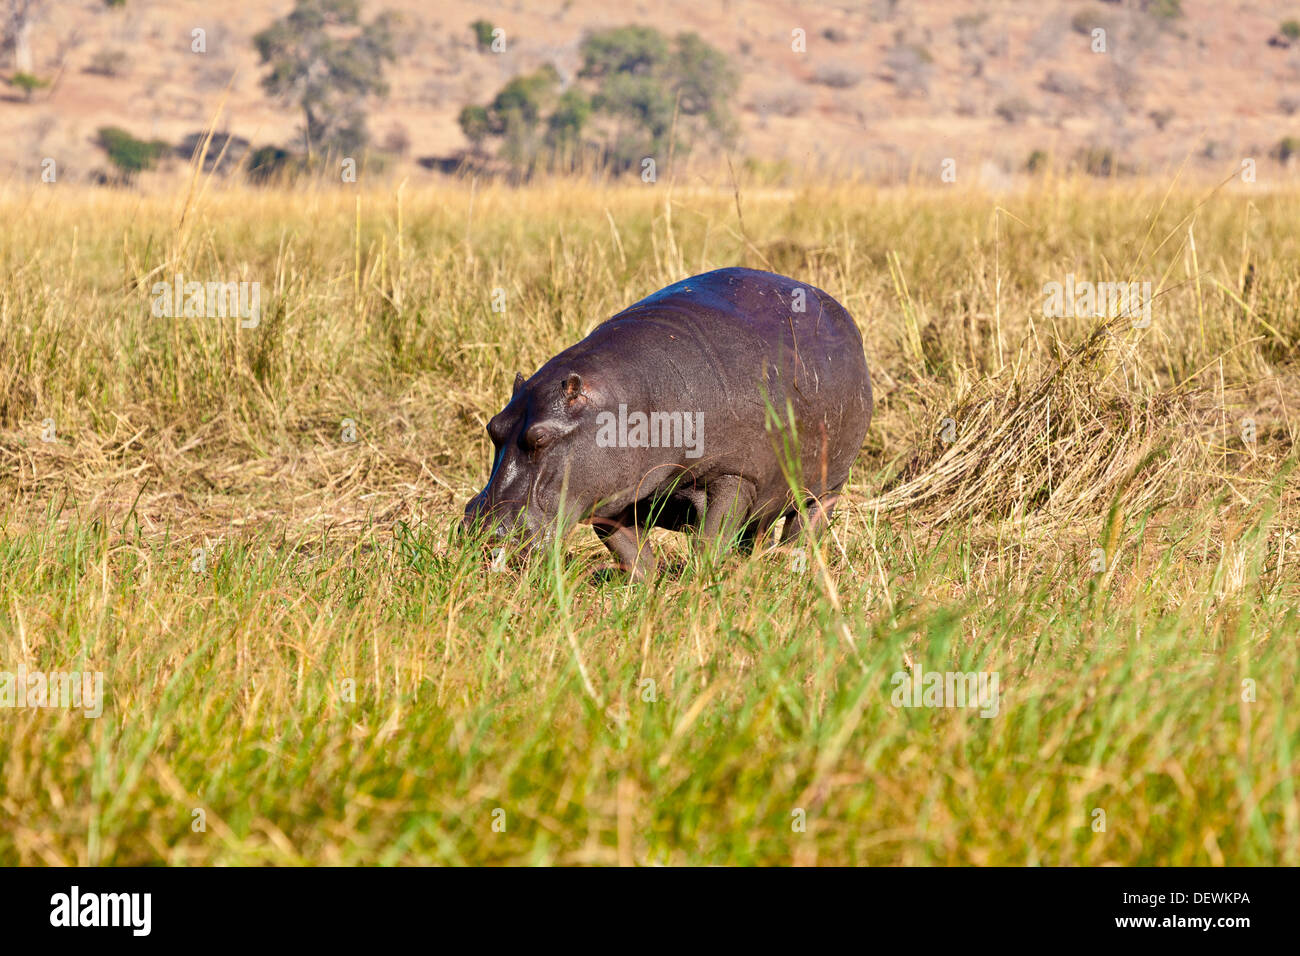 A hippopotamus out of the water in Chobe national park, Botswana Stock Photo